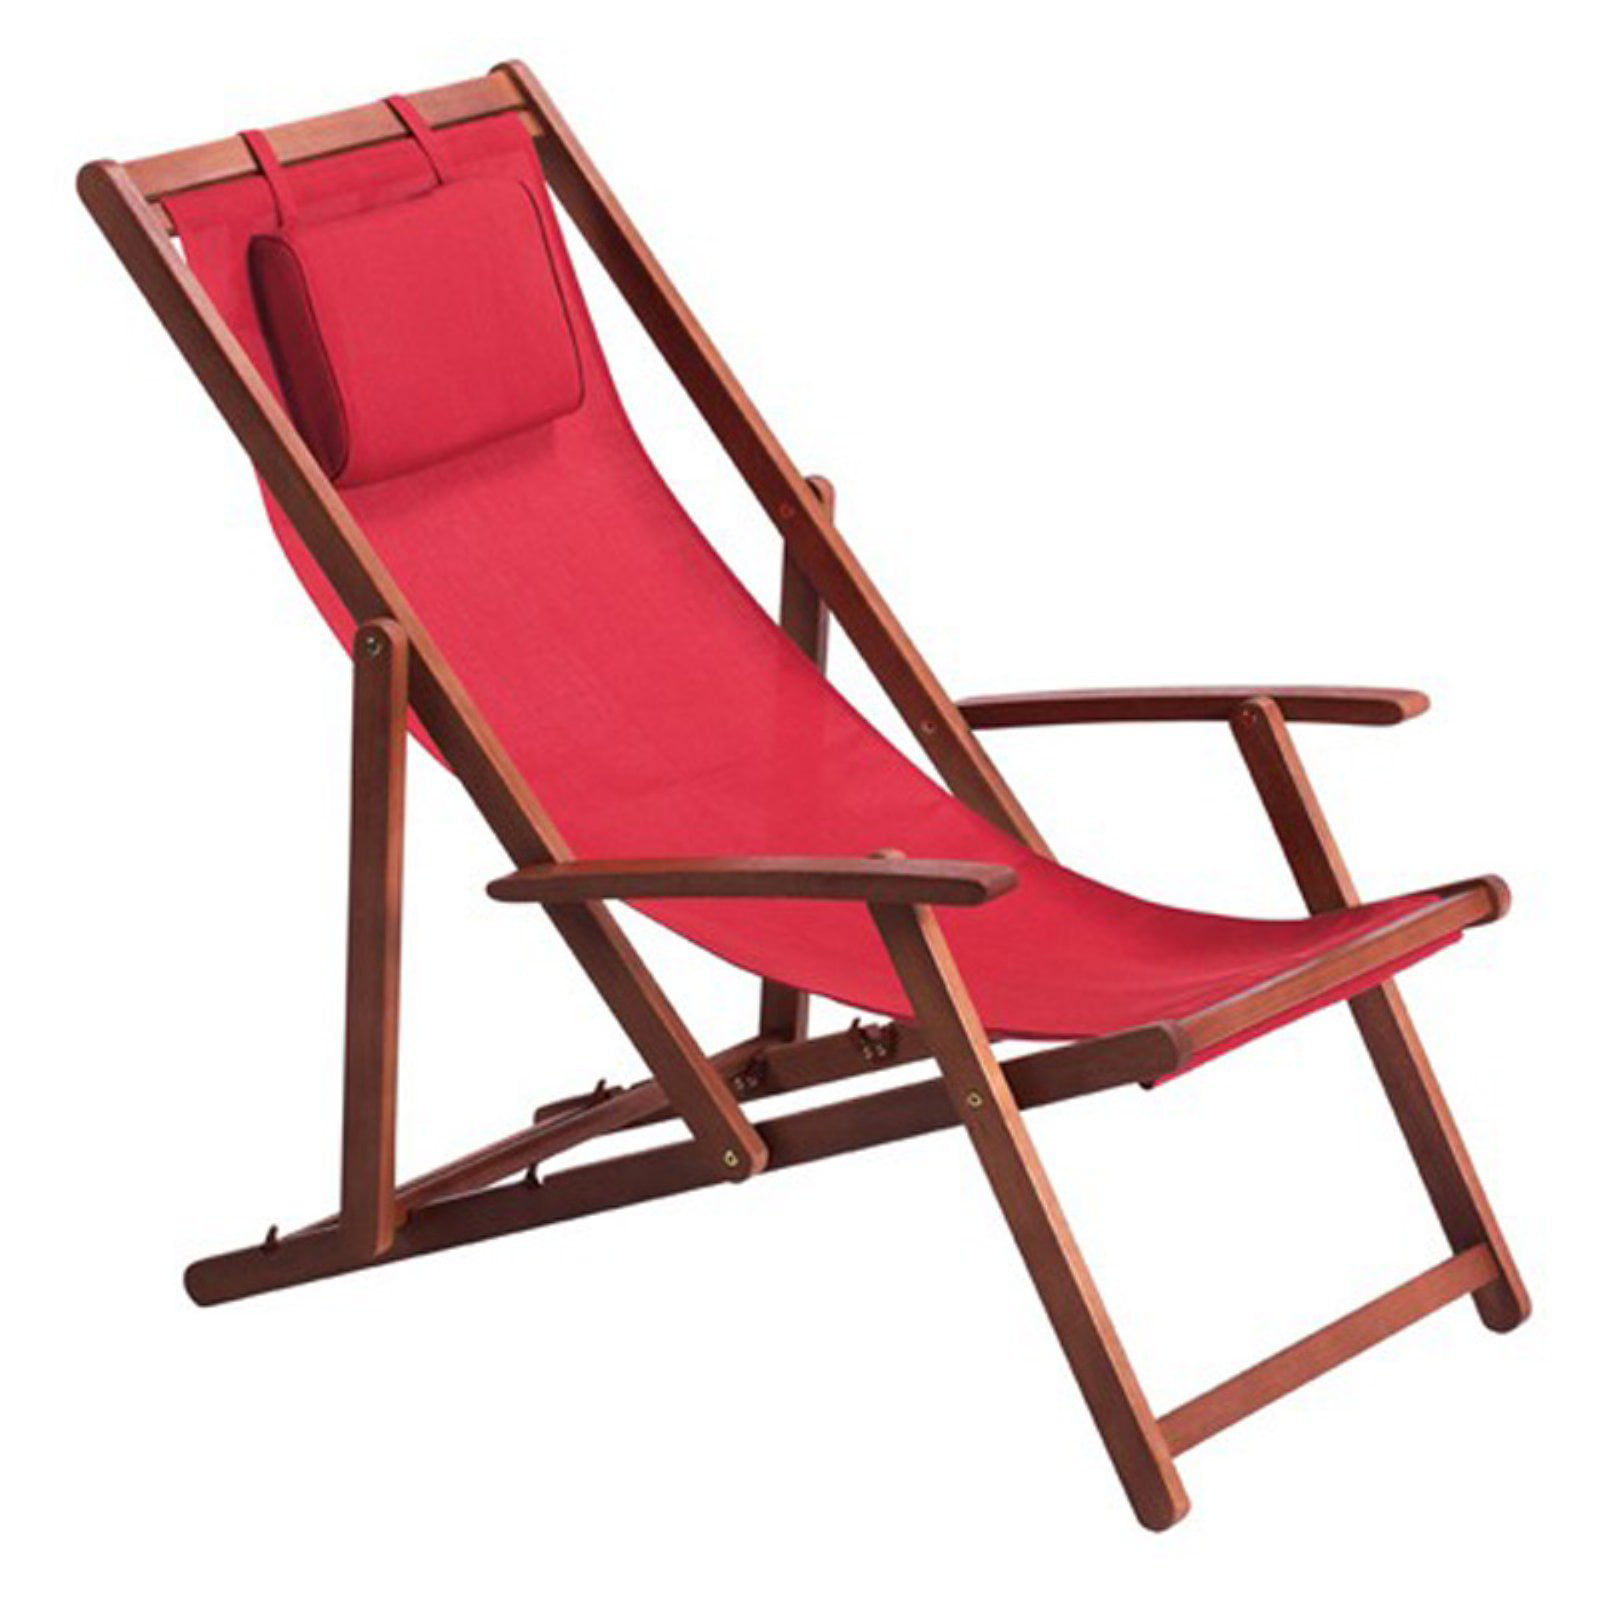 New Foldable Beach Chair for Small Space